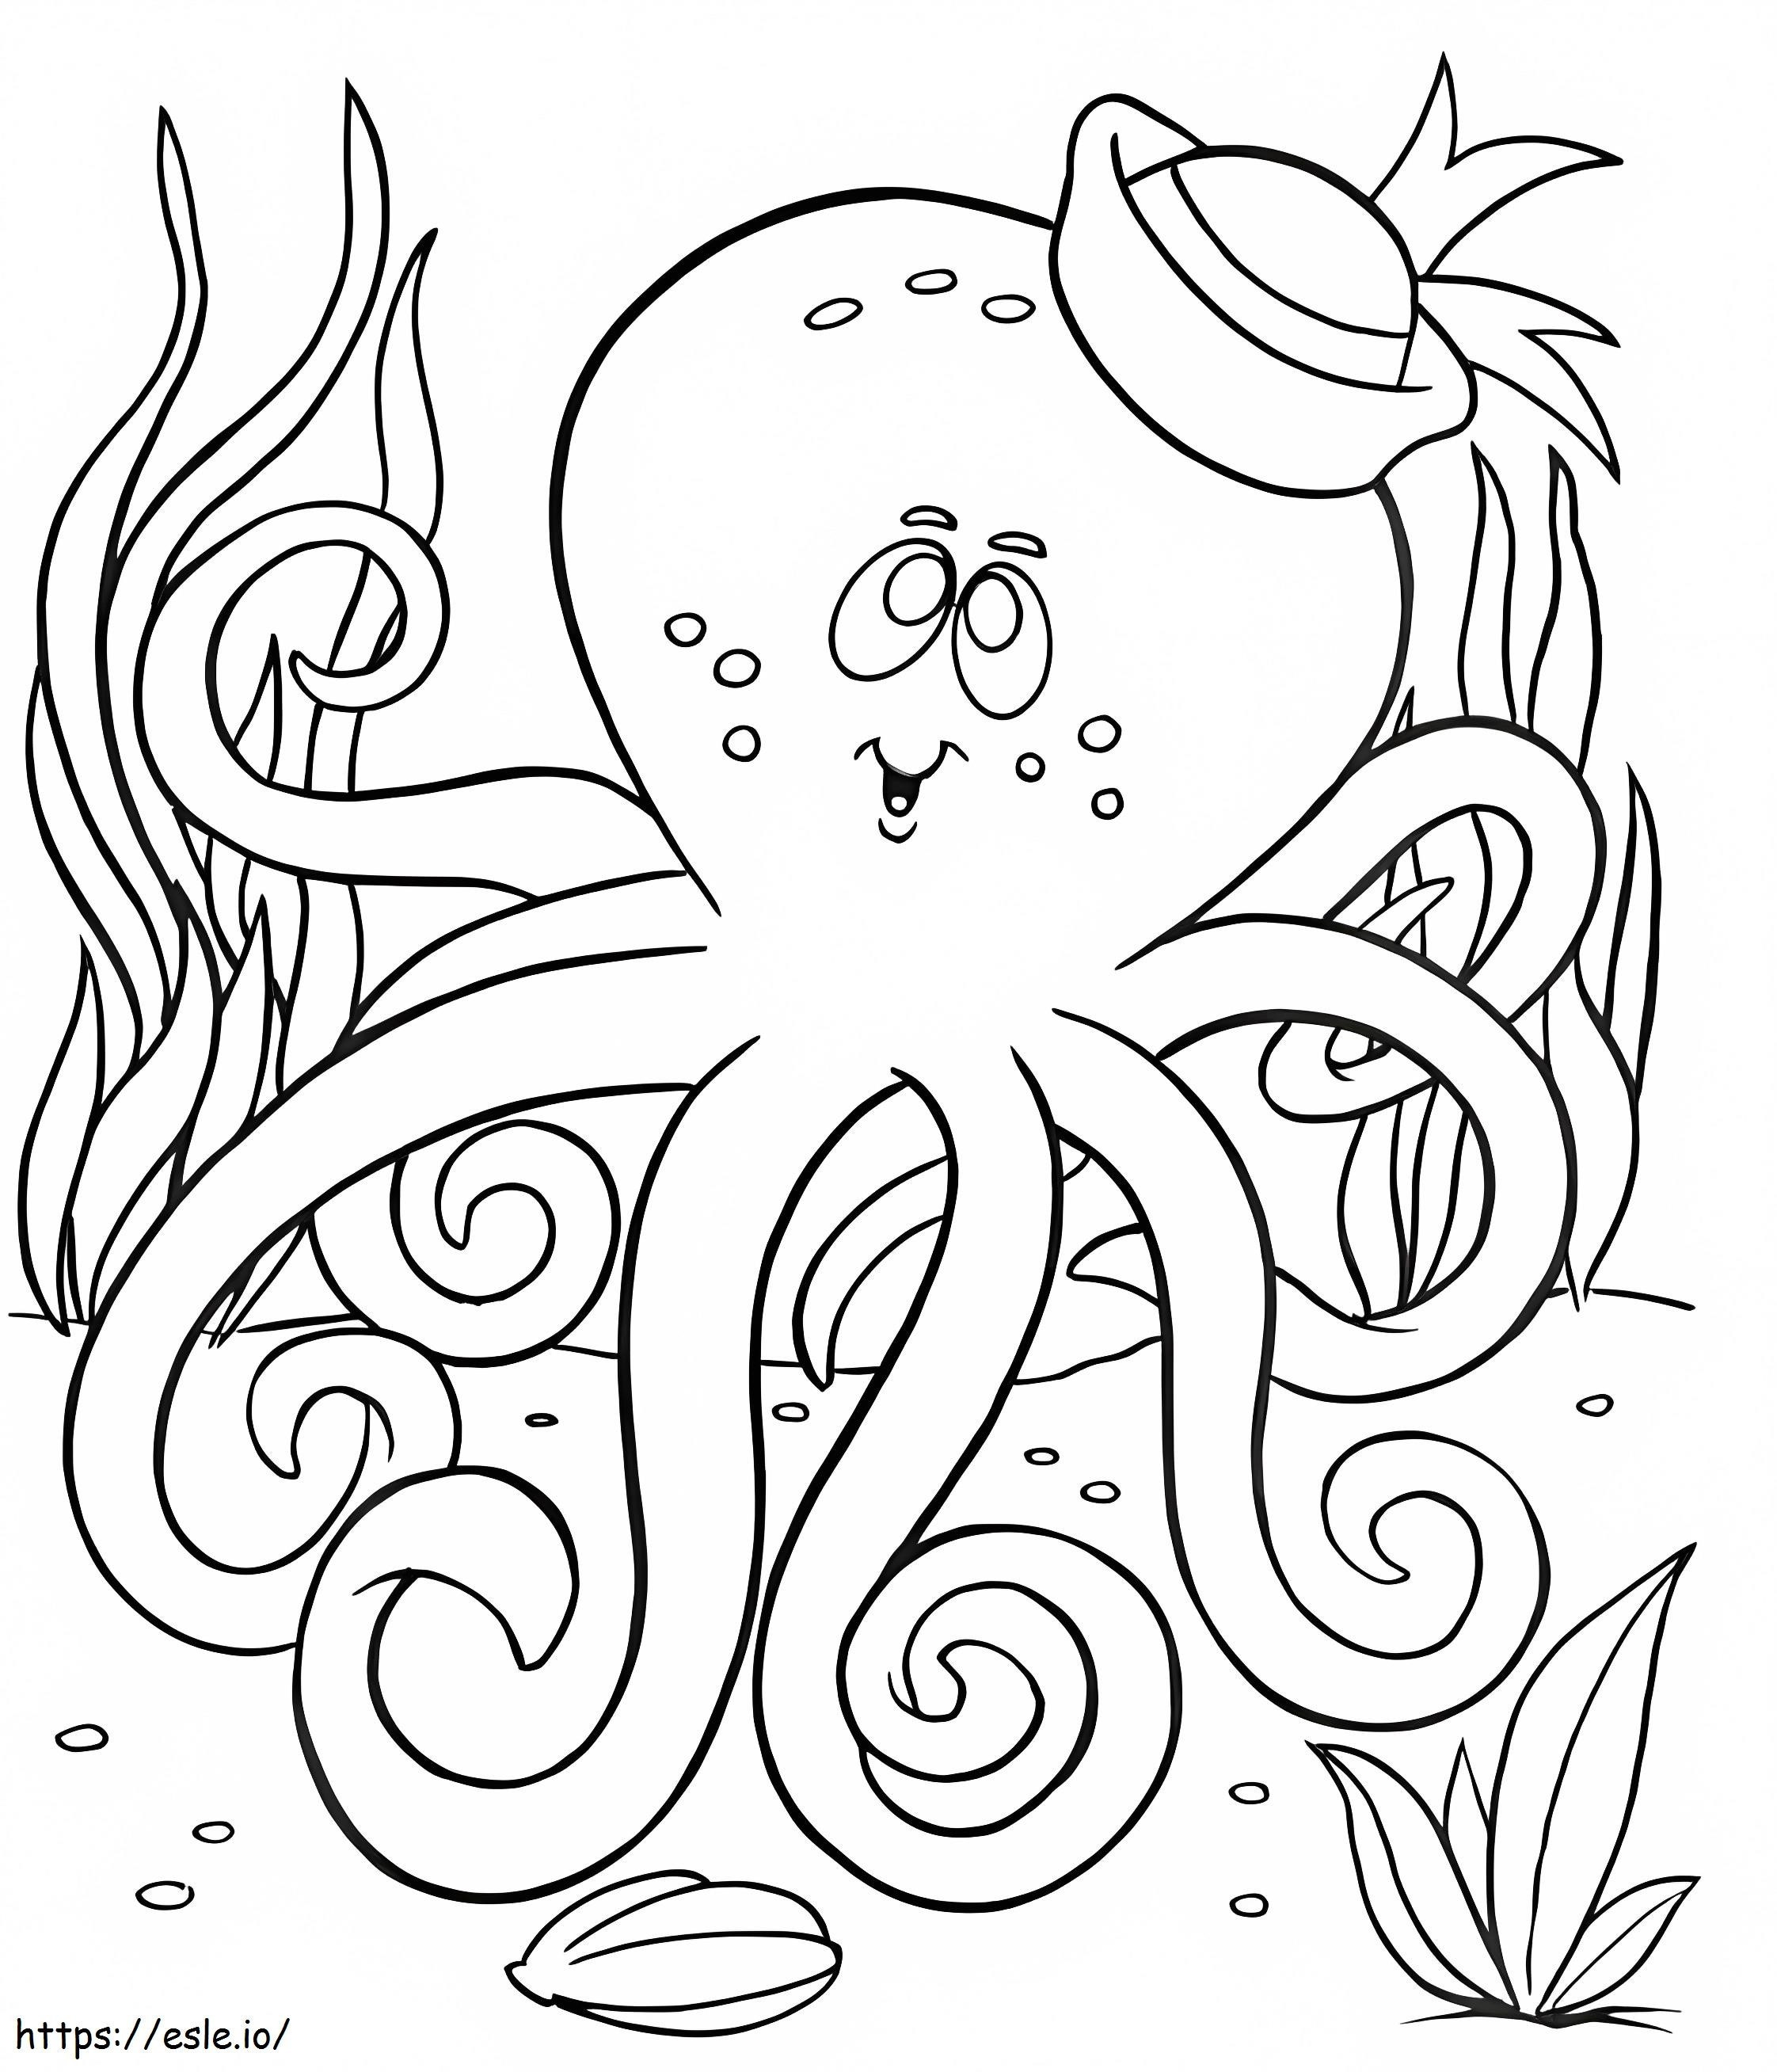 Octopus With Hat coloring page